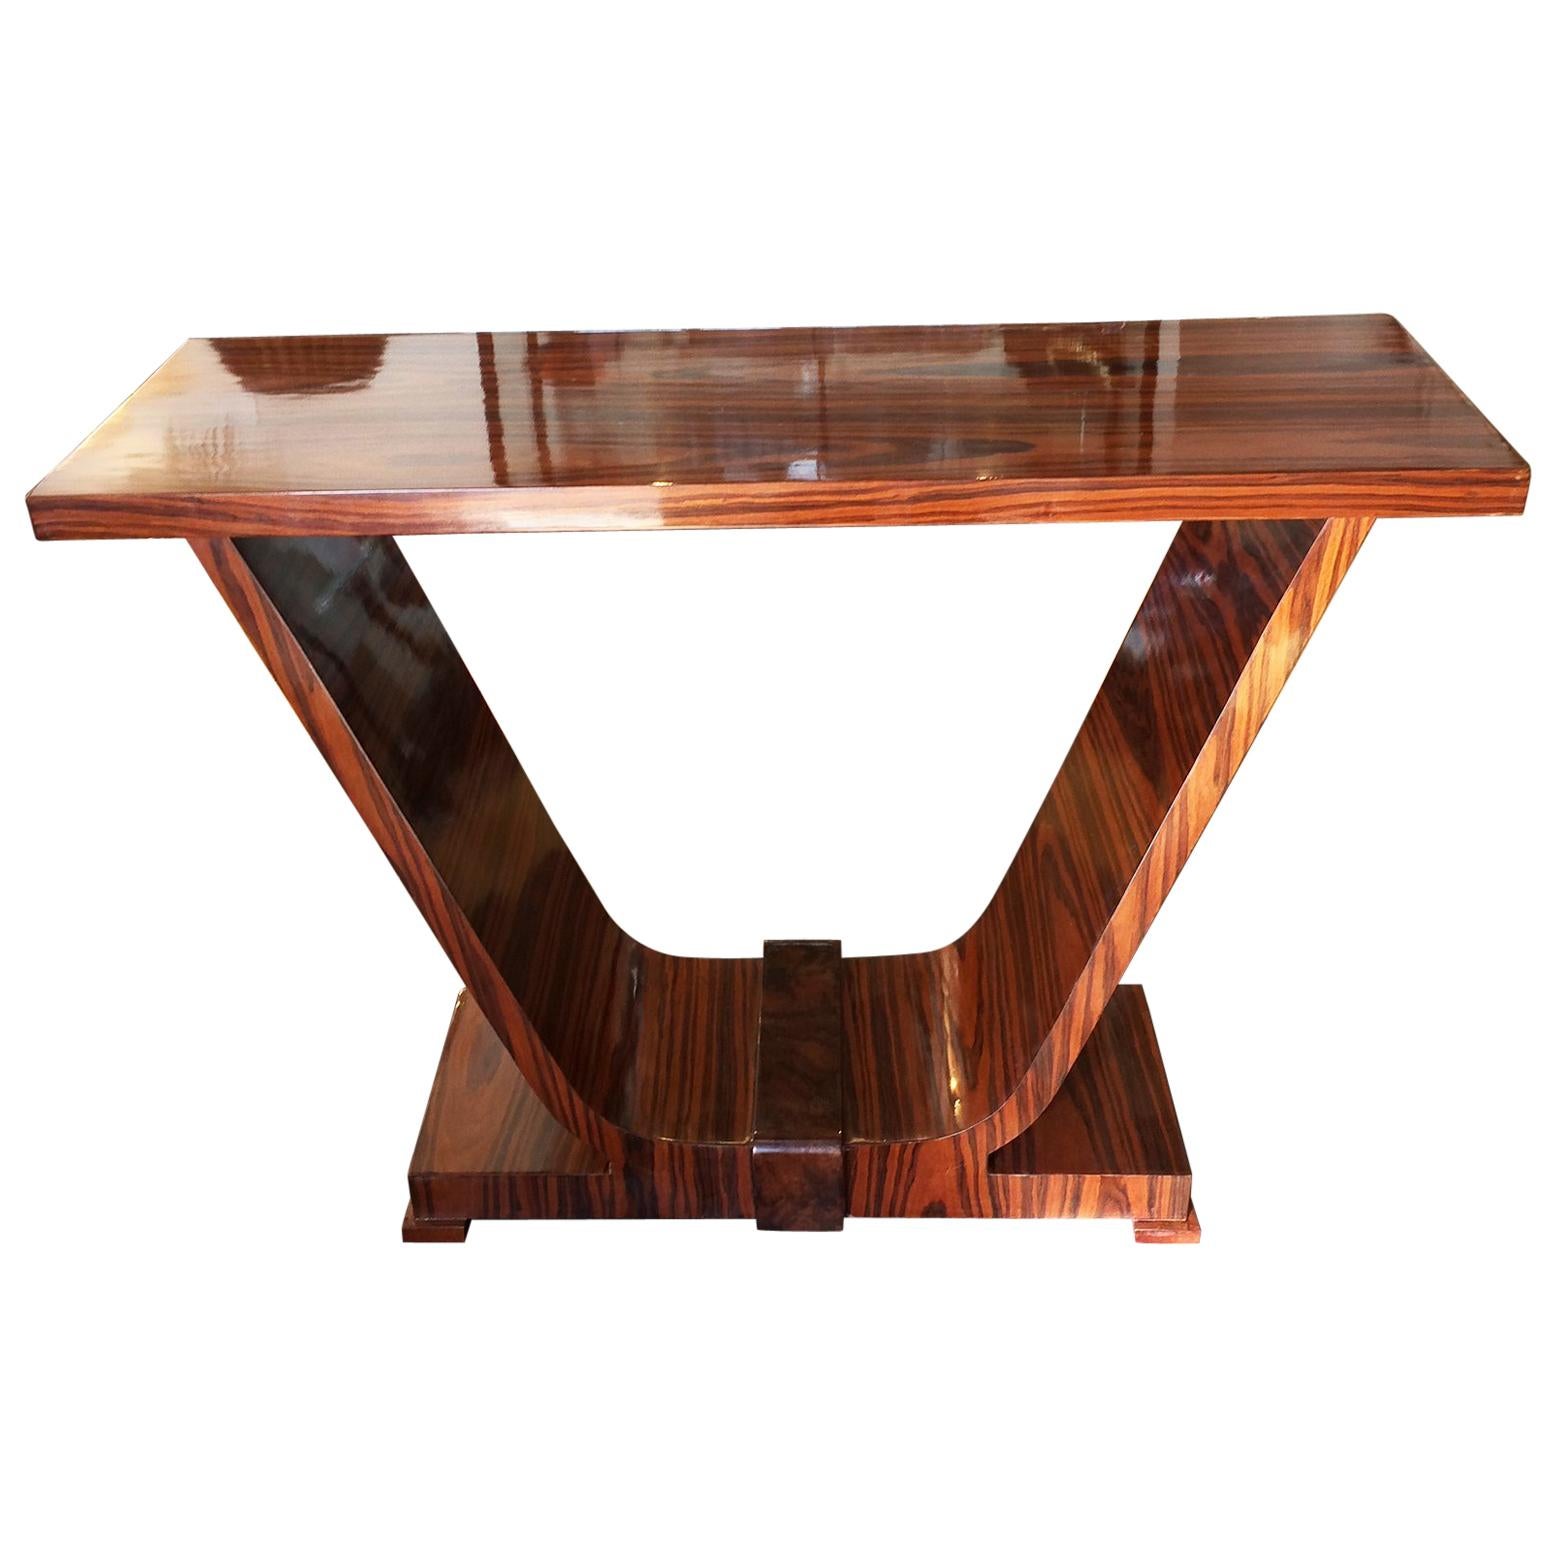 Spectacular Art Deco Design Console or Hall Table